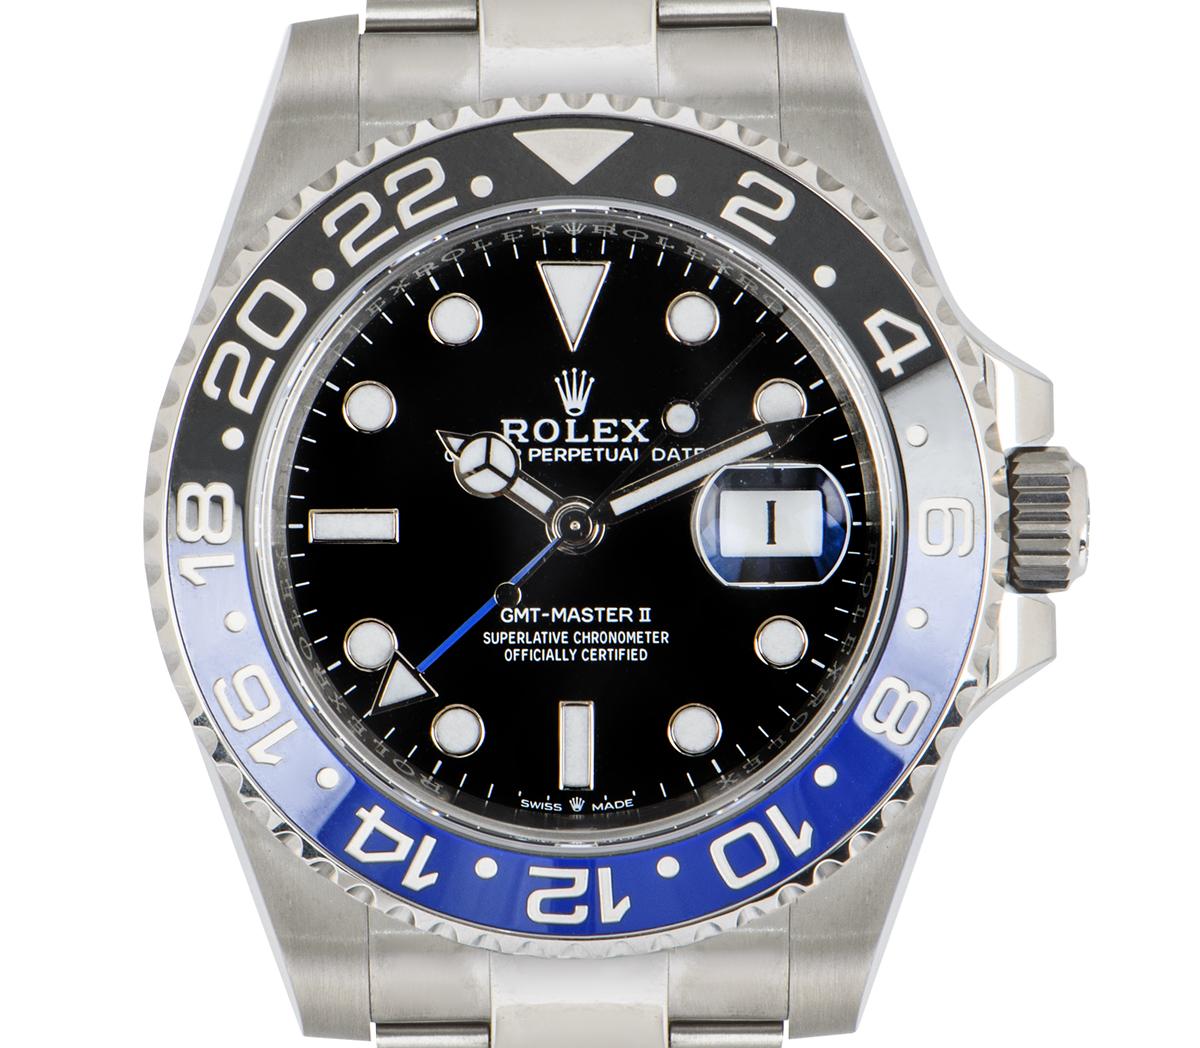 An unworn GMT-Master II Batman in Oystersteel from Rolex, featuring a black dial with a blue time zone hand and date display. The ceramic two-colour black and blue bidirectional rotatable bezel features a graduated 24 hour display.

The 126710BLNR